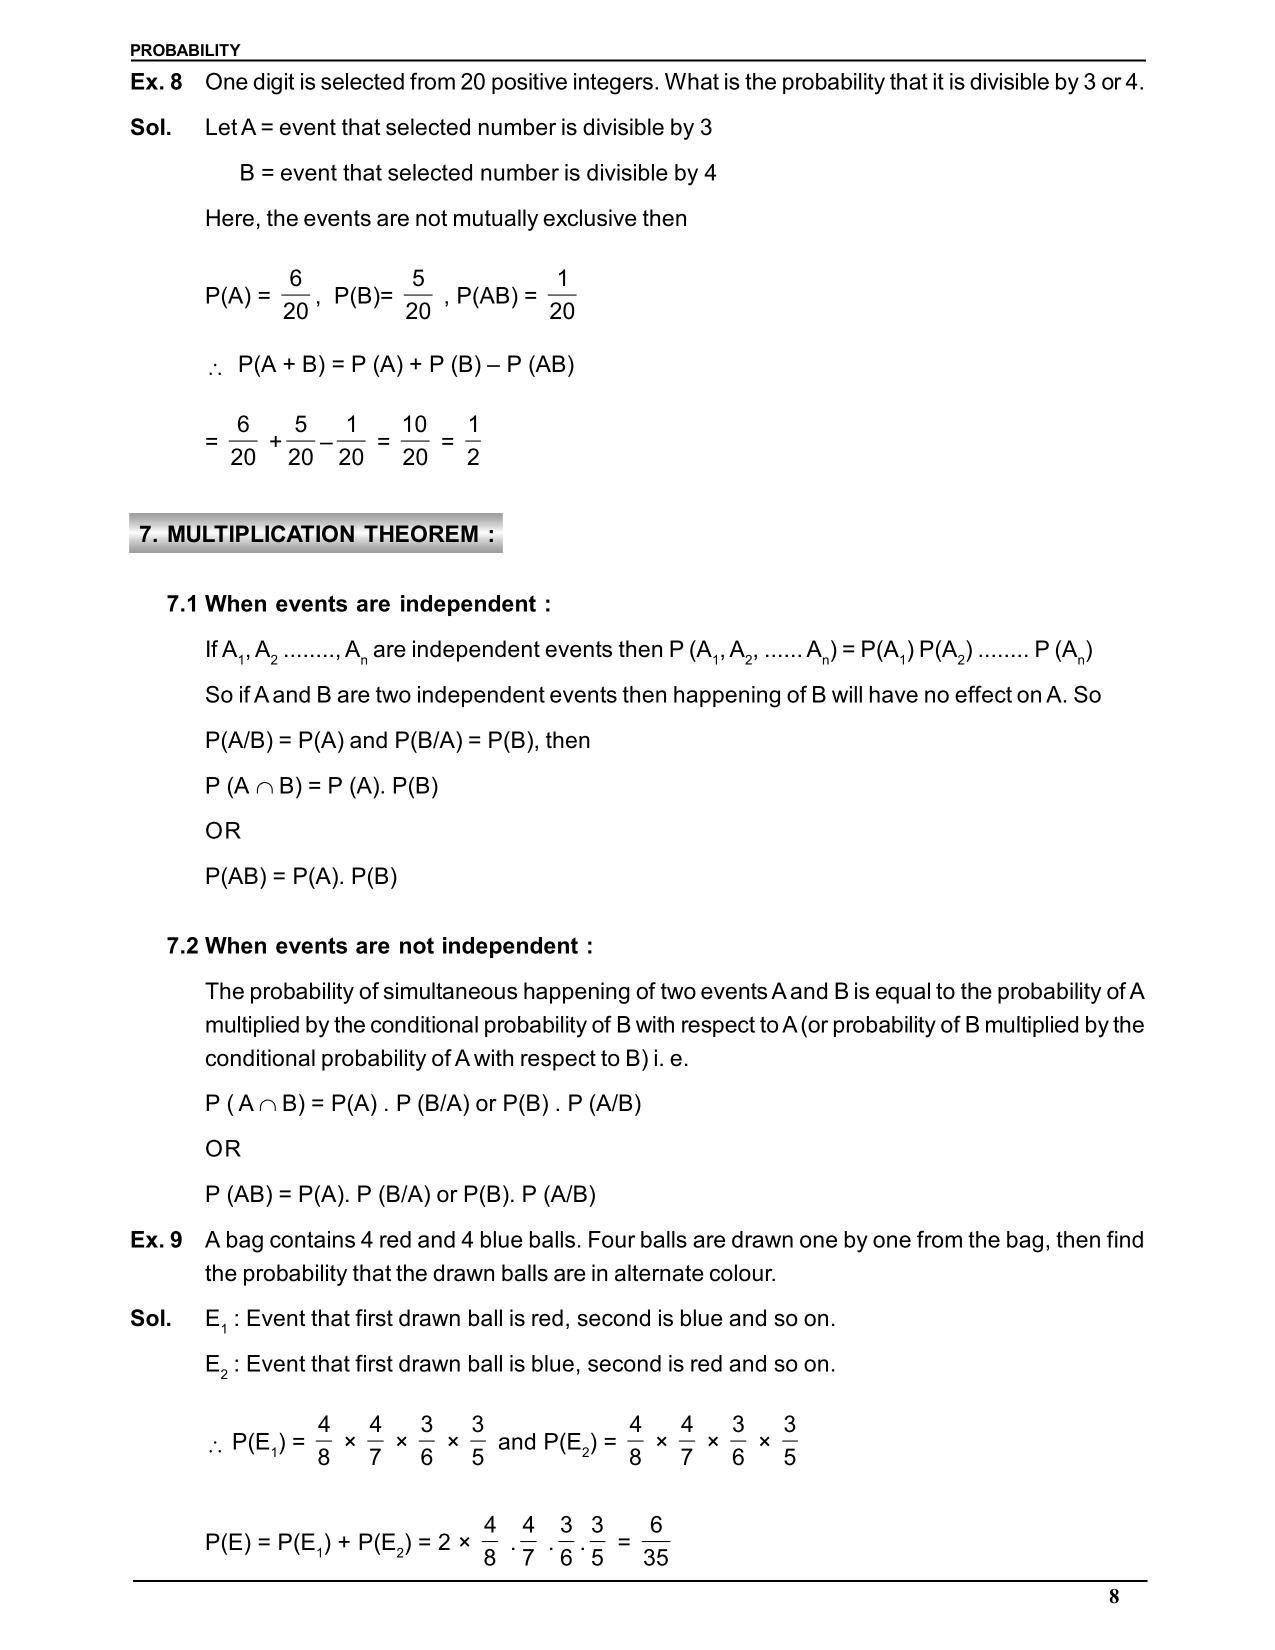 Probability Notes for Class 11 : Multiplication Theorem